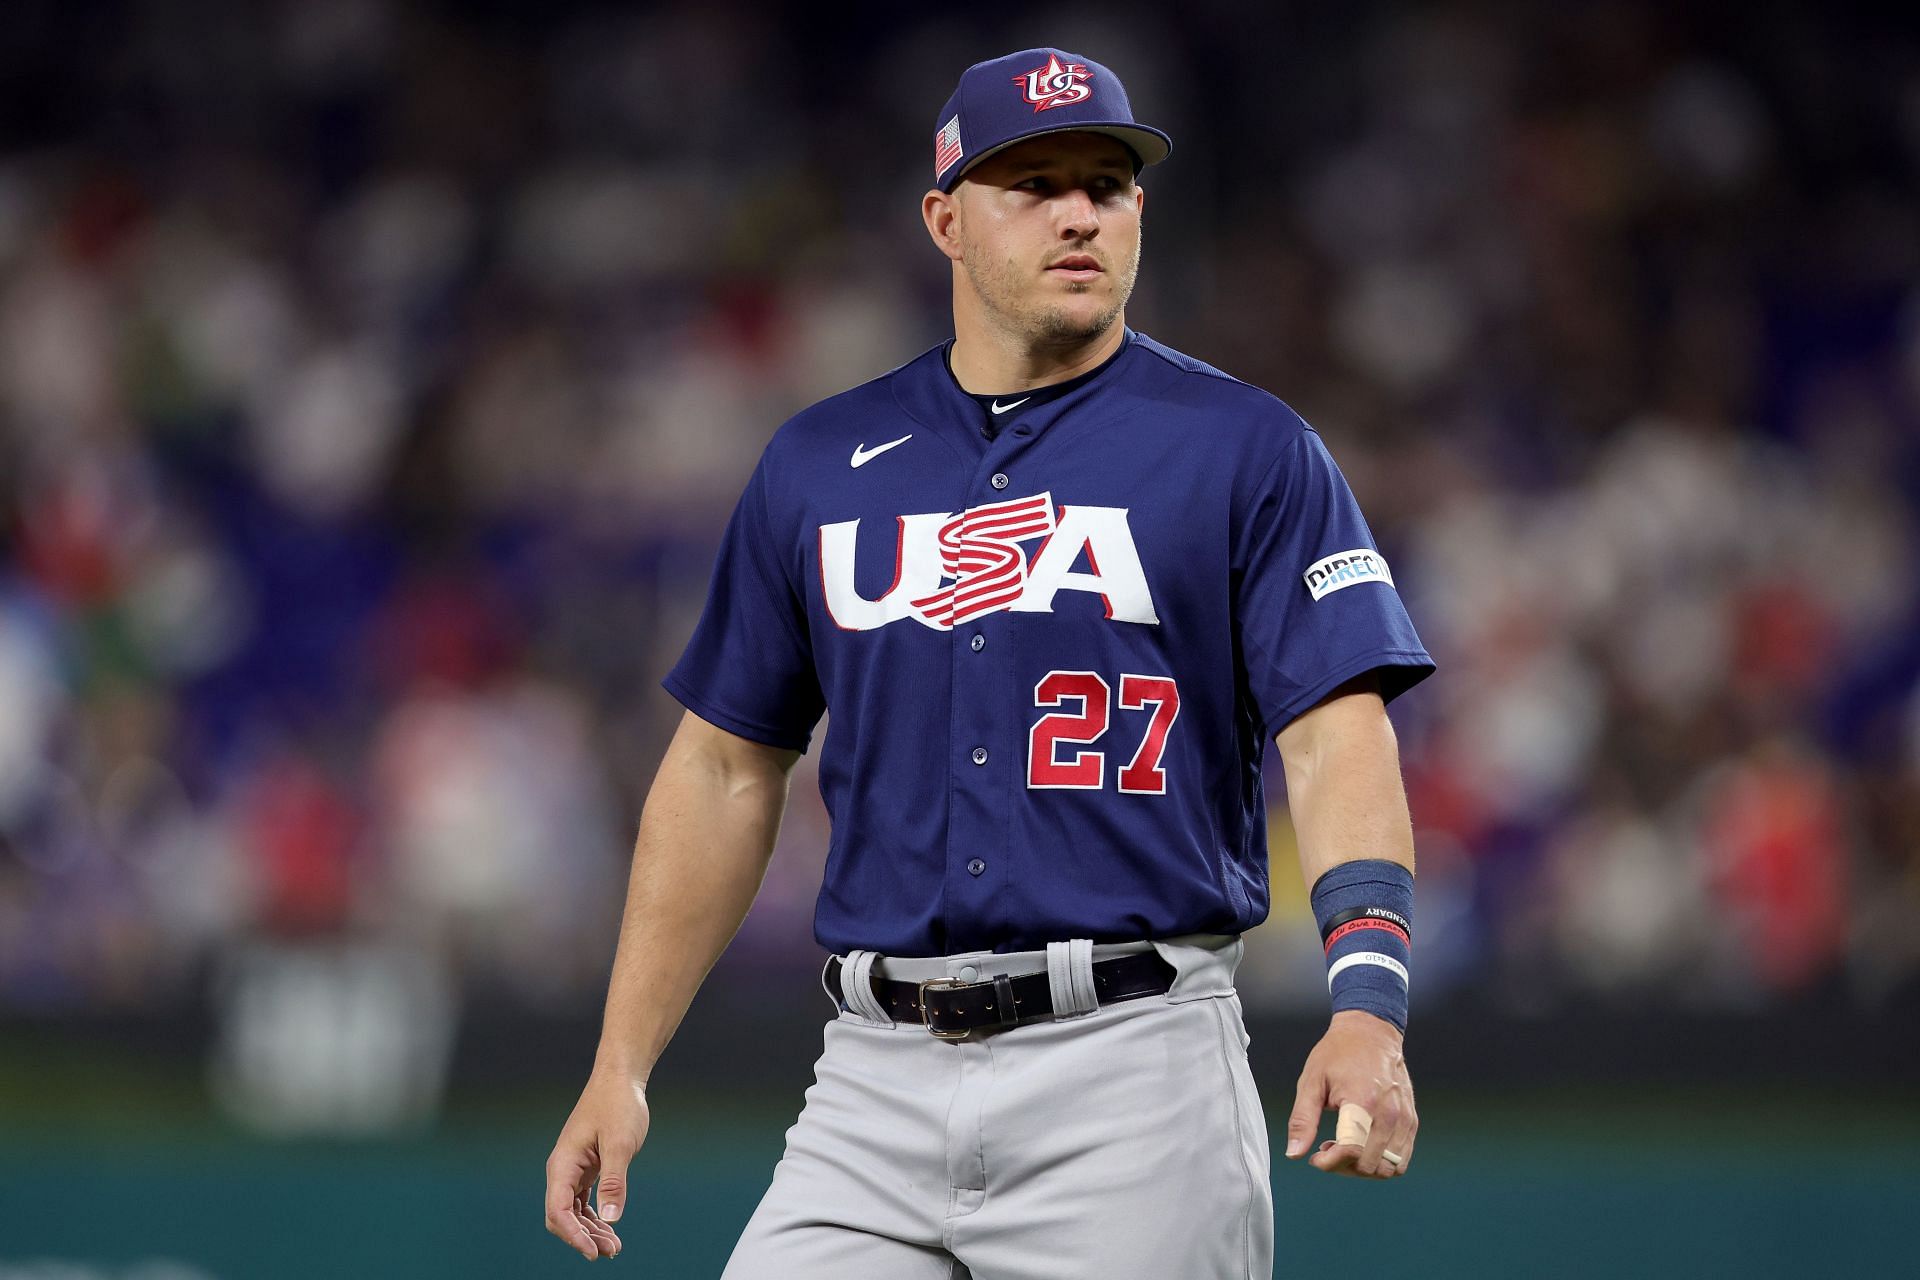 Team USA superstar outfielder Mike Trout is fully committed to